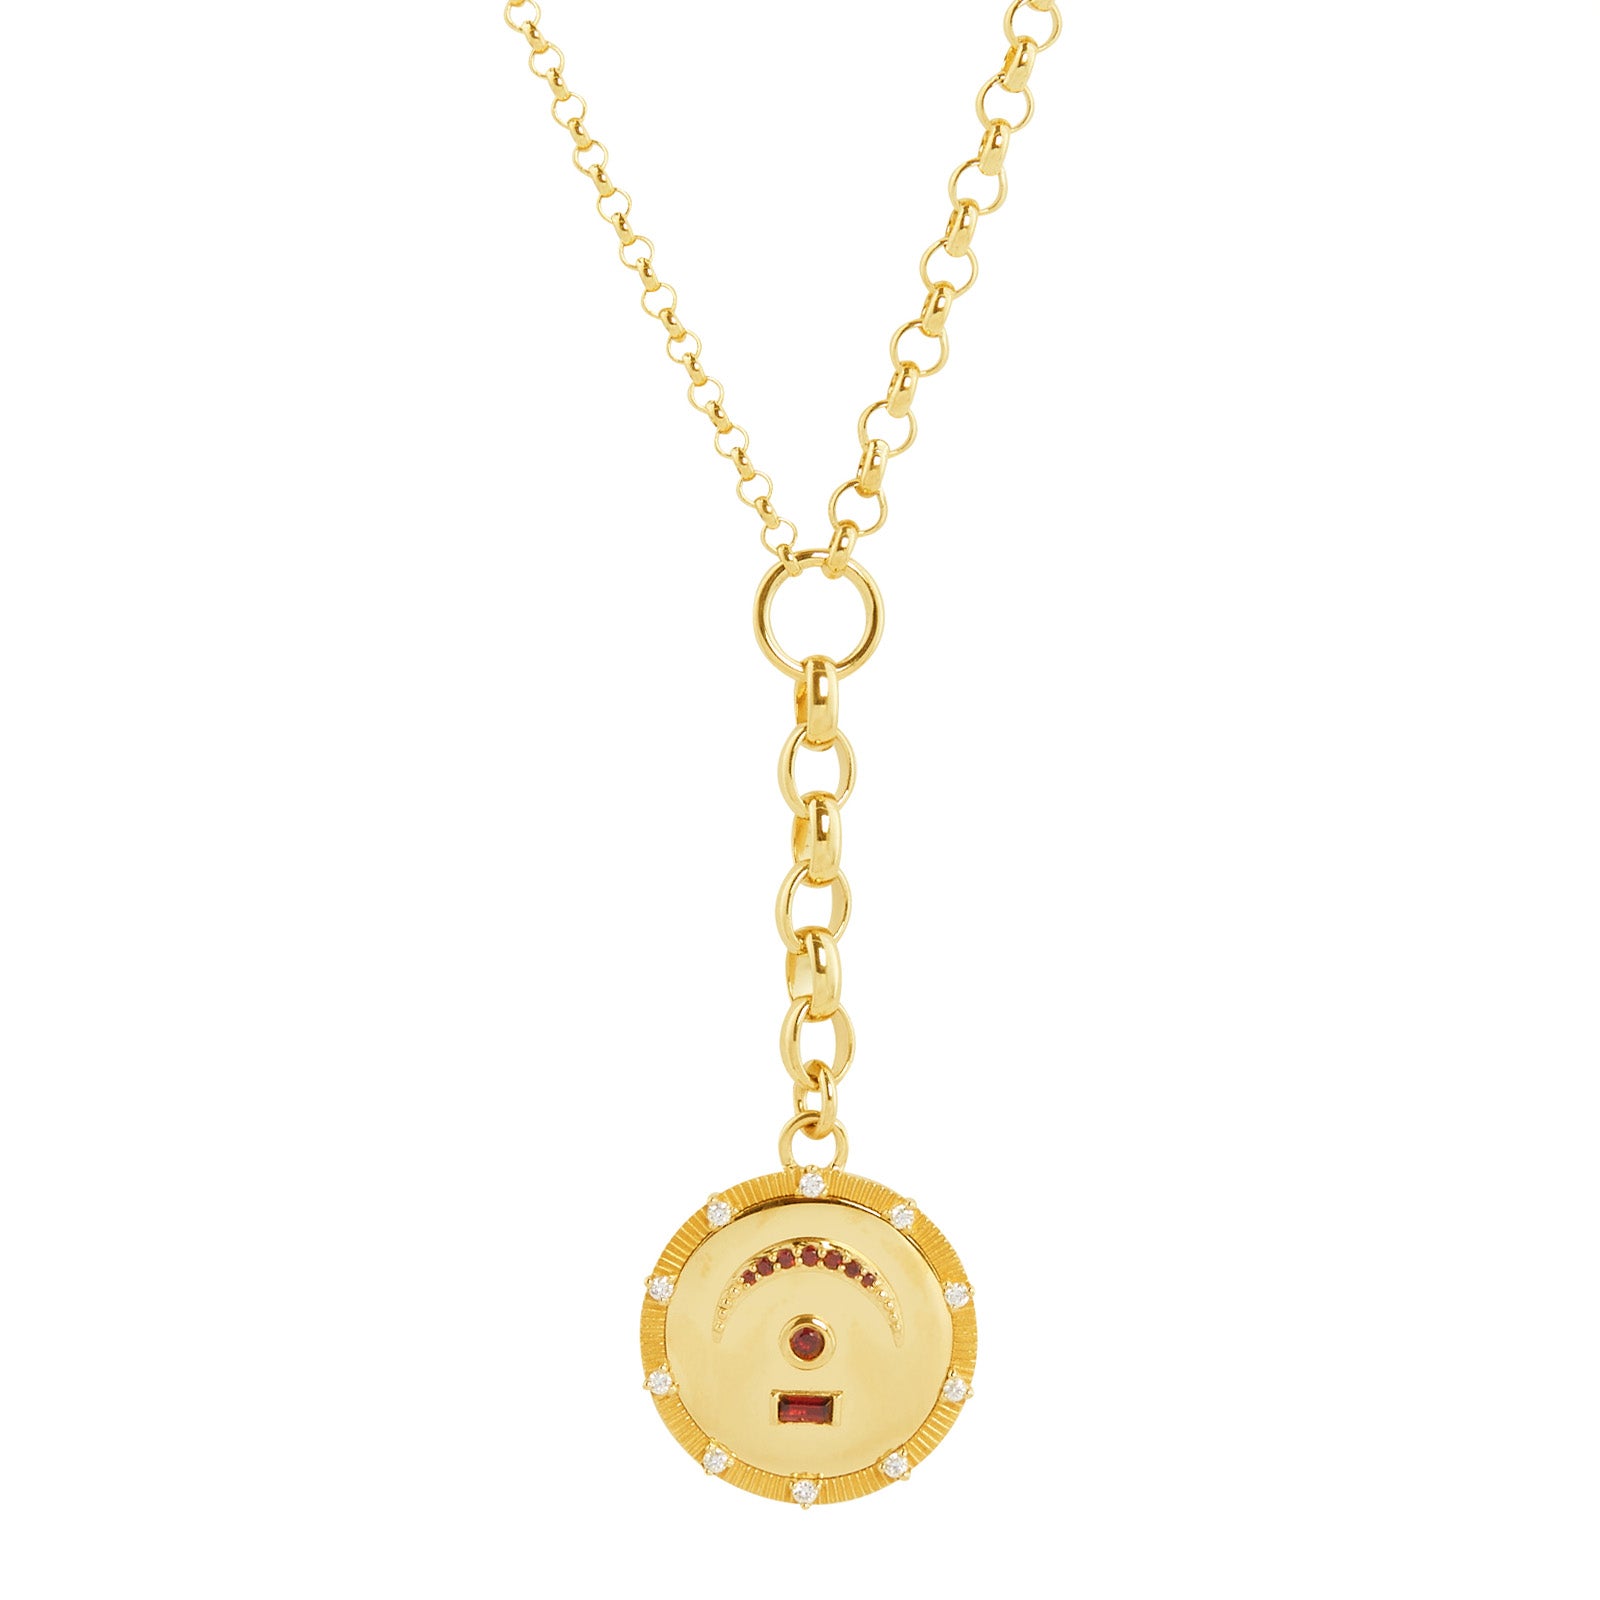 Foundrae Medium Mixed Belcher Extension Chain Necklace with Pause Medallion